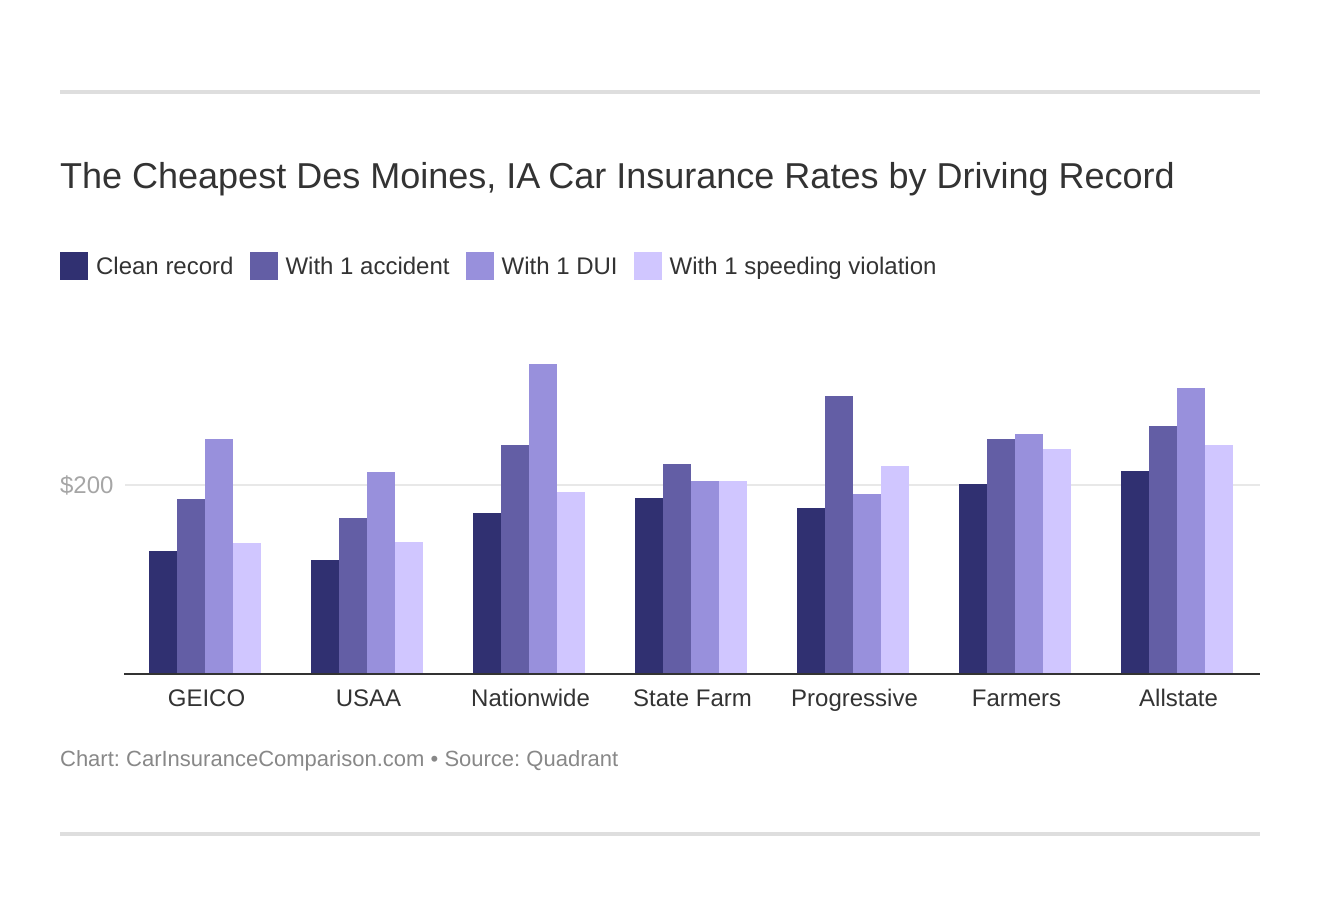 The Cheapest Des Moines, IA Car Insurance Rates by Driving Record